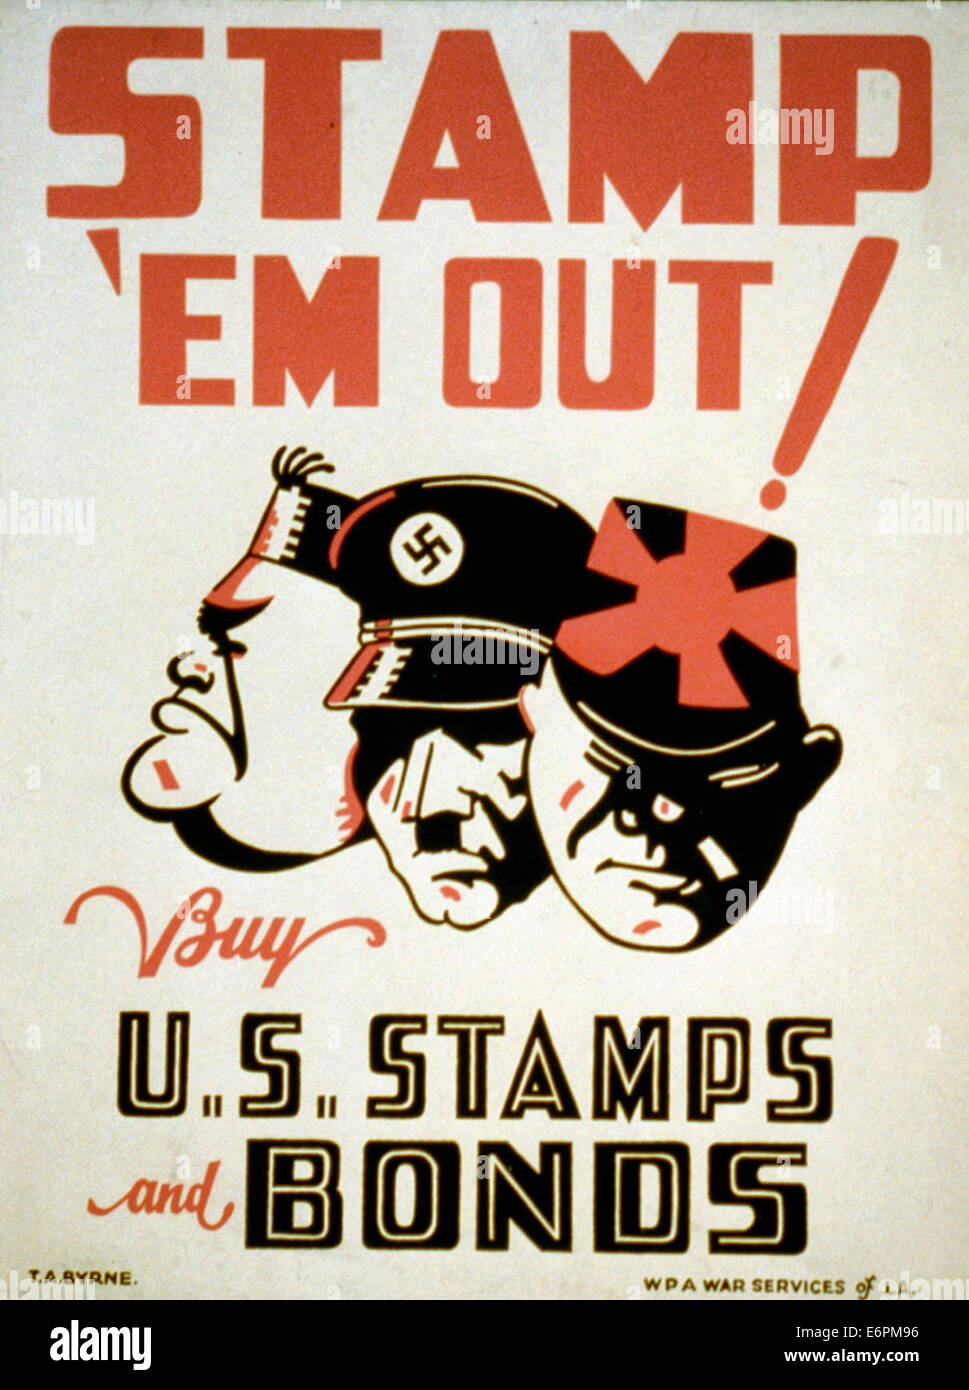 Stamp 'em out Buy U.S. stamps and bonds - Poster encouraging purchase of war stamps and bonds to support the war effort, showing faces of Hitler, Mussolini, and Hirohito, circa 1942 Stock Photo